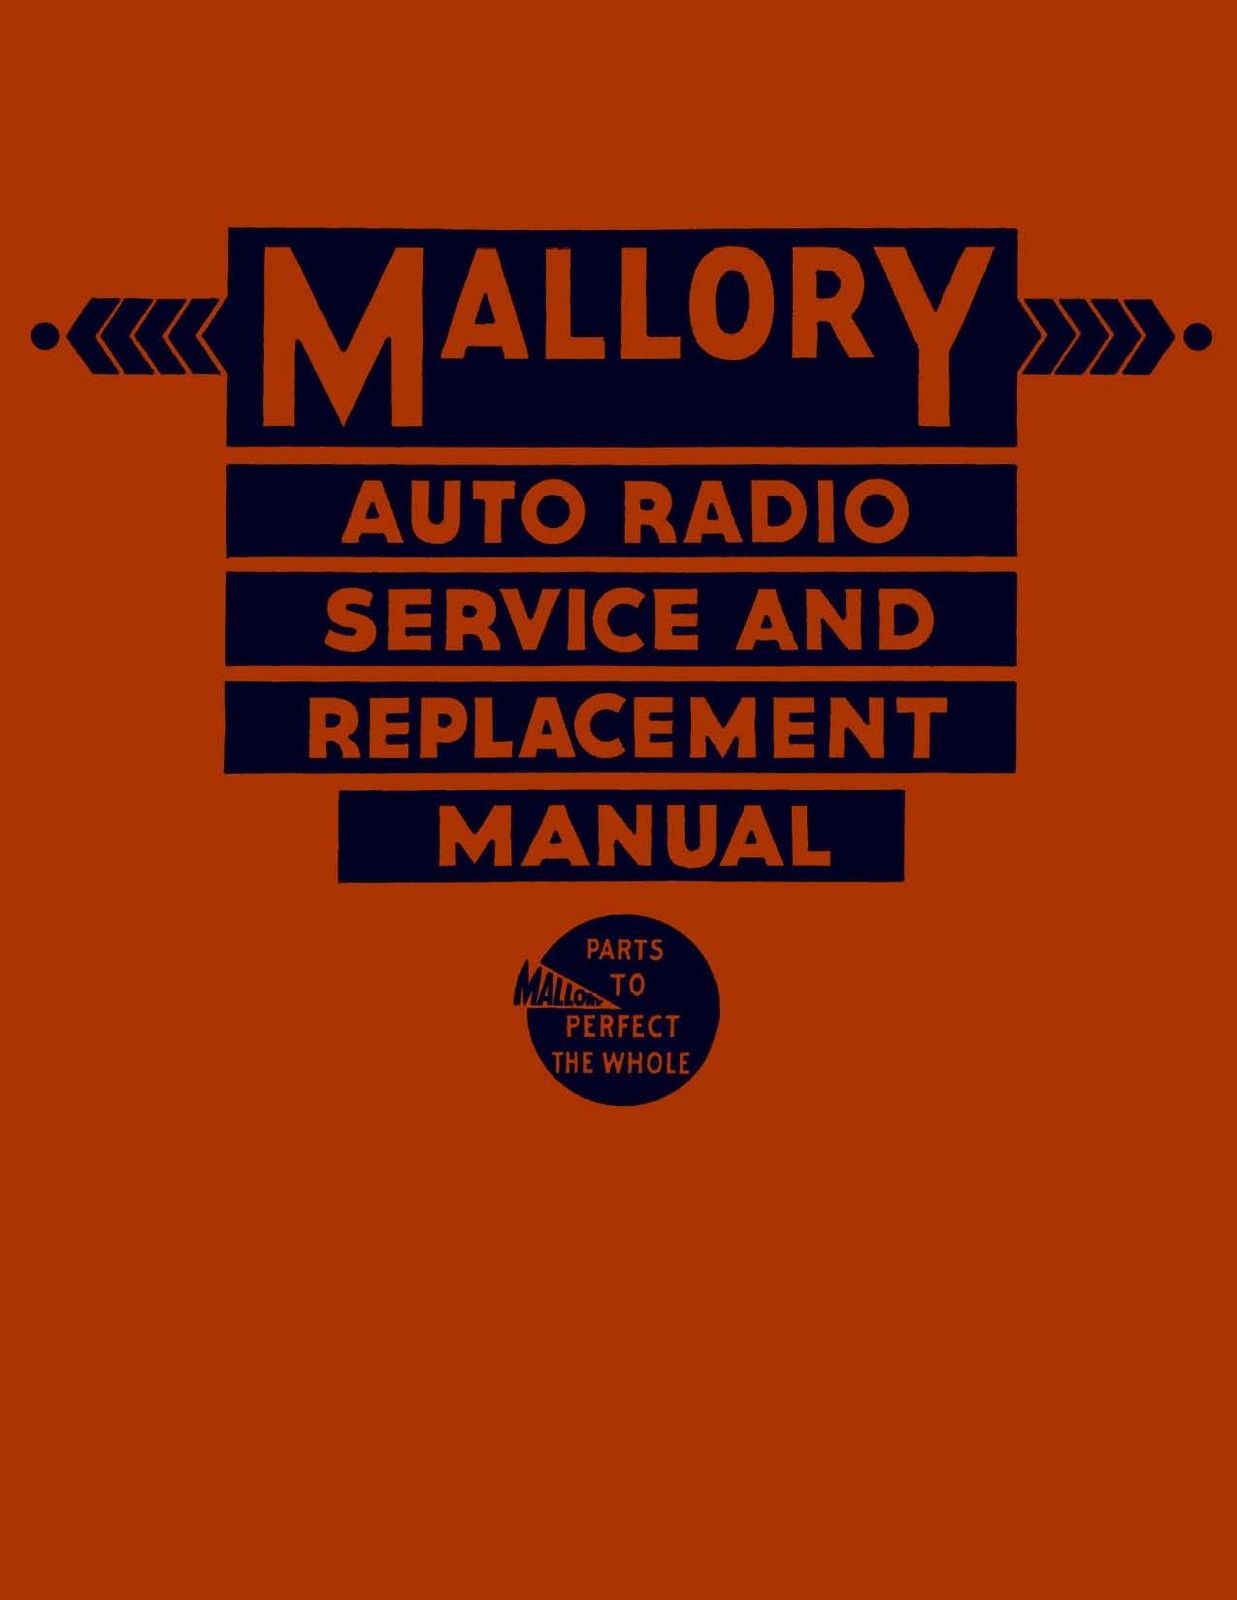 1935 Mallory Auto Radio Service and Replacement Manual - CDROM - High Res